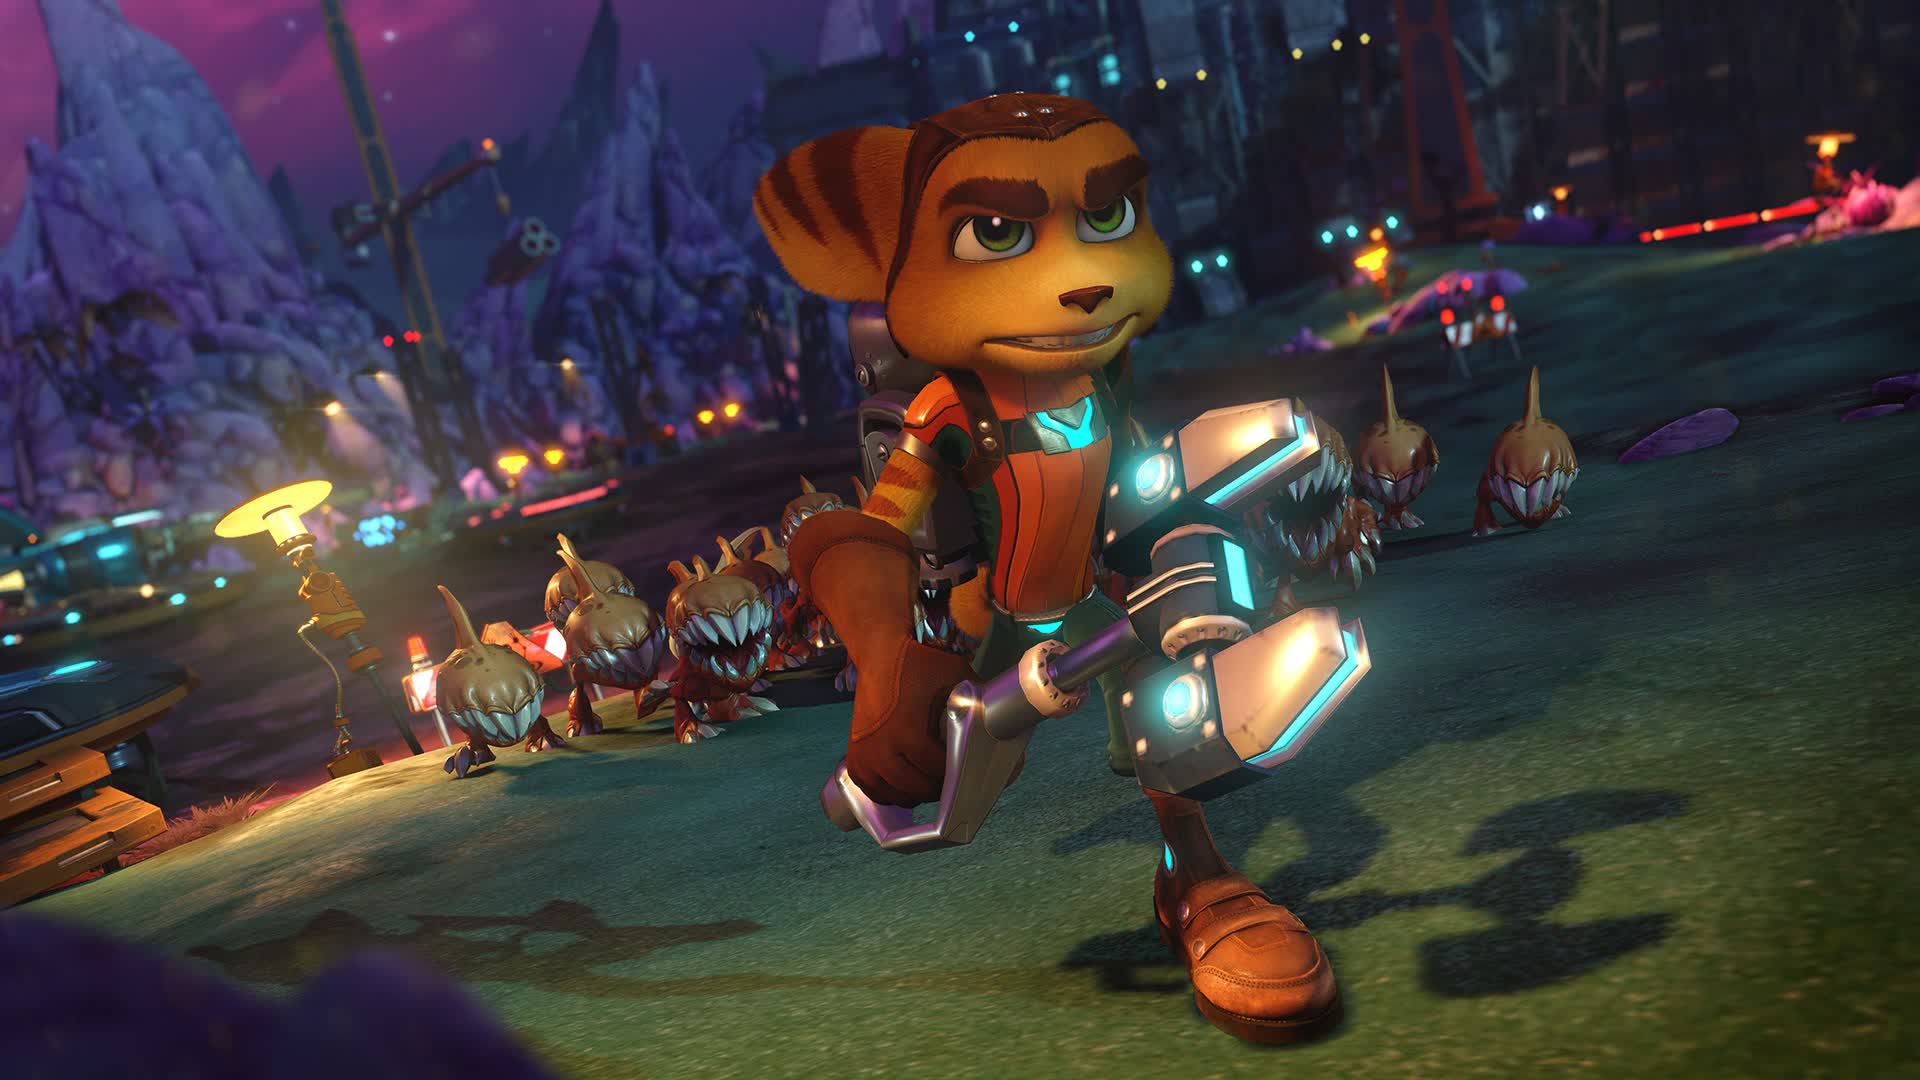 Ratchet & Clank for PS4 is still free-to-keep until March 31, will get a PS5 upgrade in April